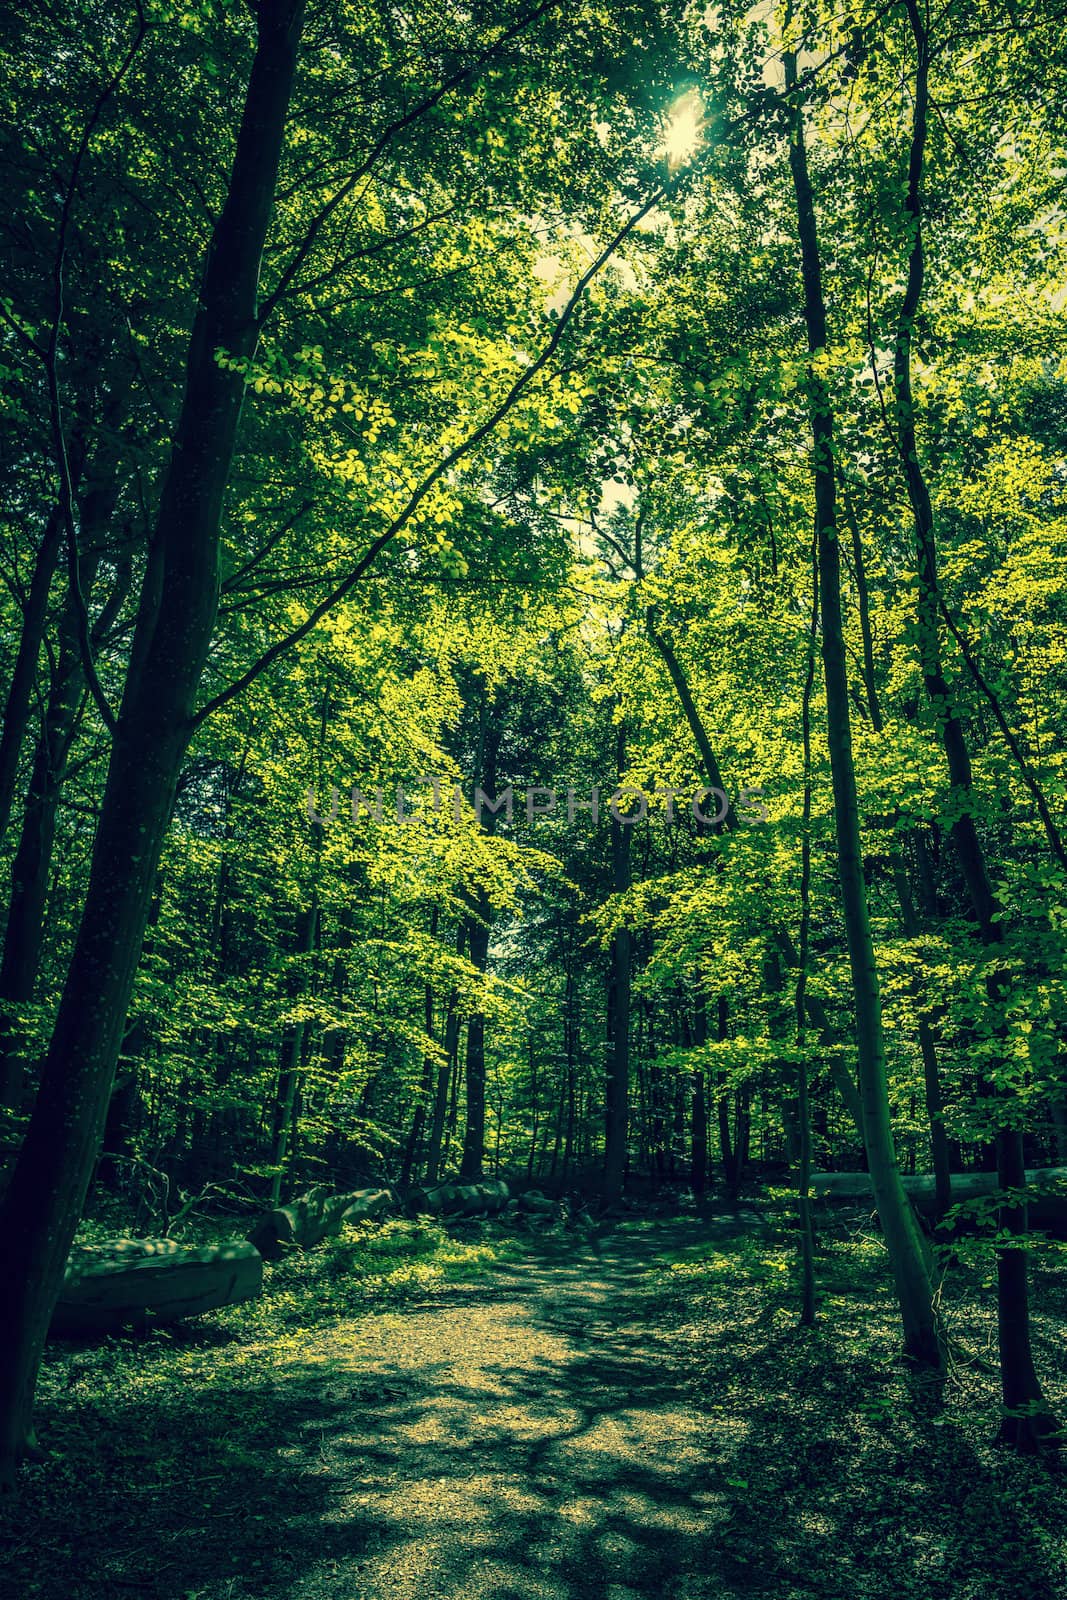 Green trees in a forest clearing by Sportactive